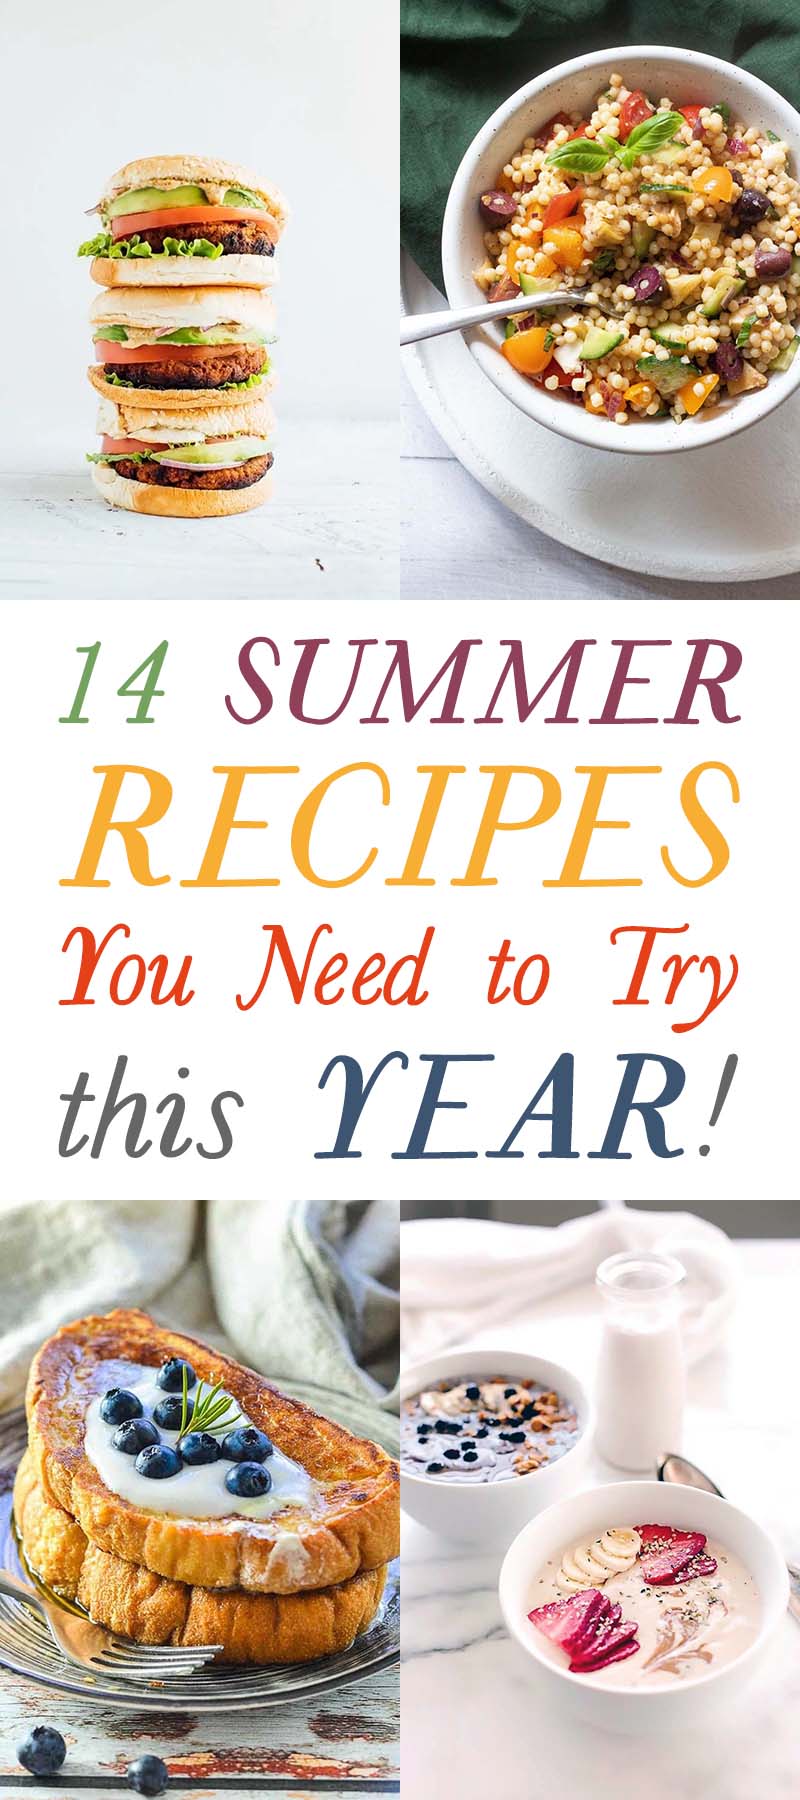 14 Summer Recipes You Need to Try This Year